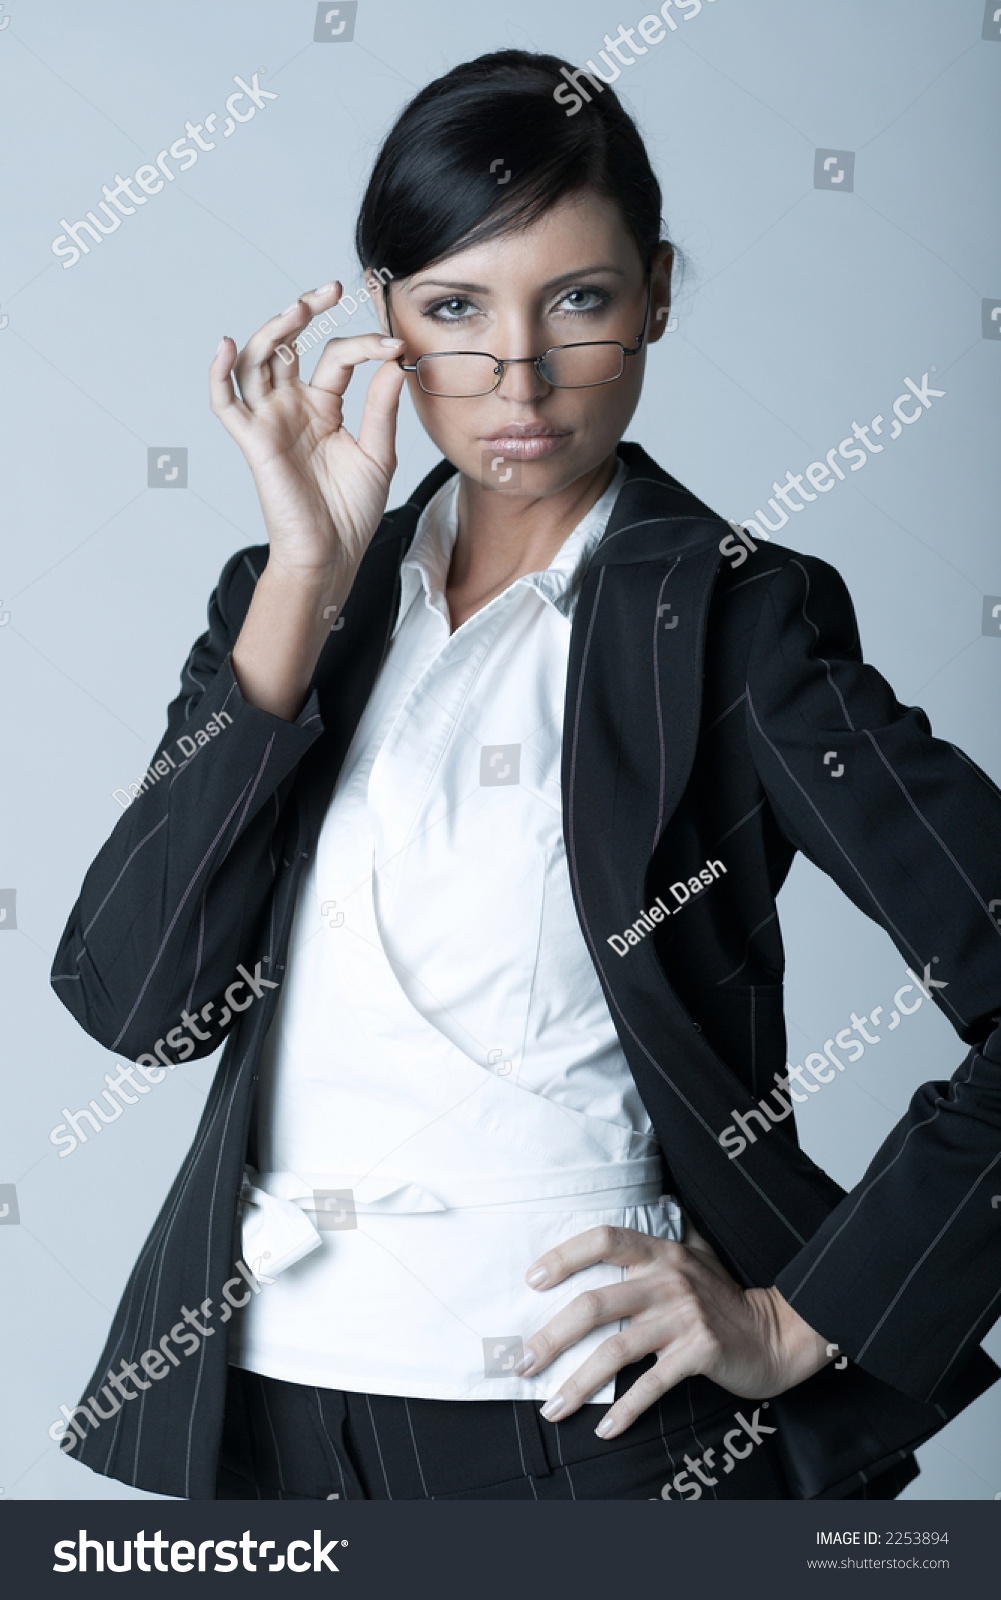 Beautiful Brunette Business Woman With Glasses Isolated On Clear ...